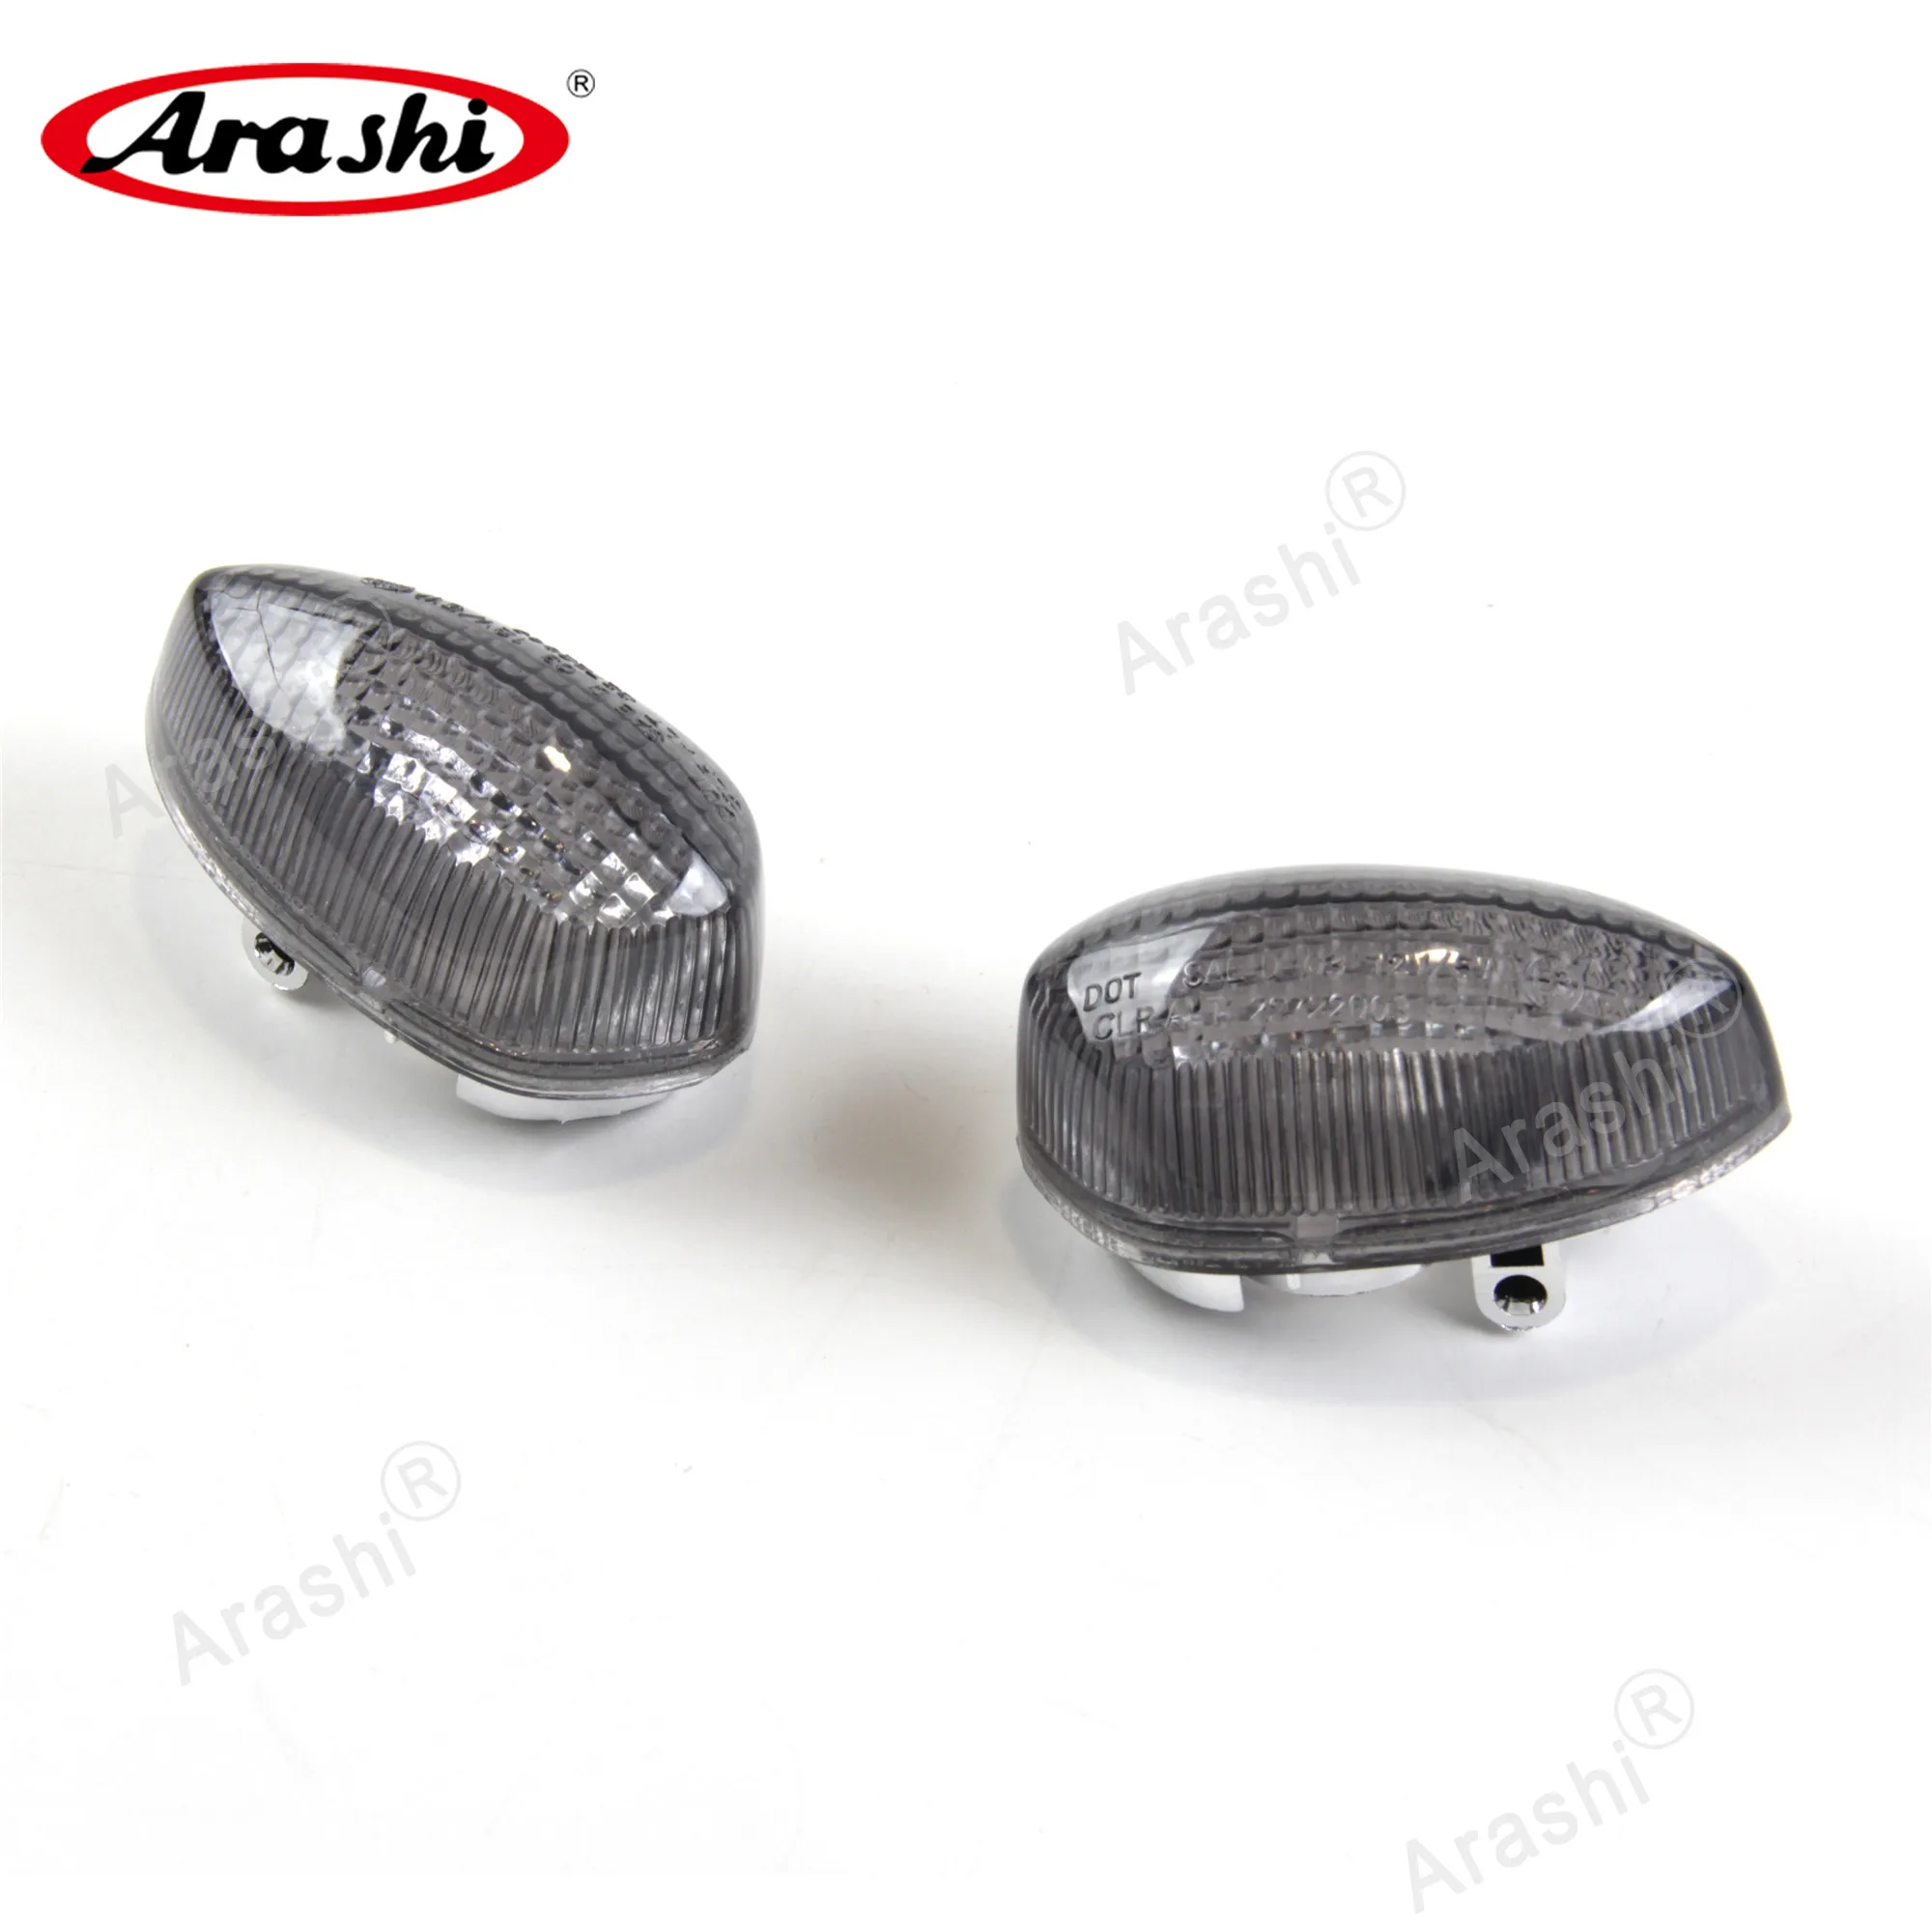 

FZ-6 2004-2009 Motorcycle Front Turn Light Signals Indicator Blinker Lens Covers For YAMAHA YZF-R1 2002-2006/ YZF-R6 2003-2006